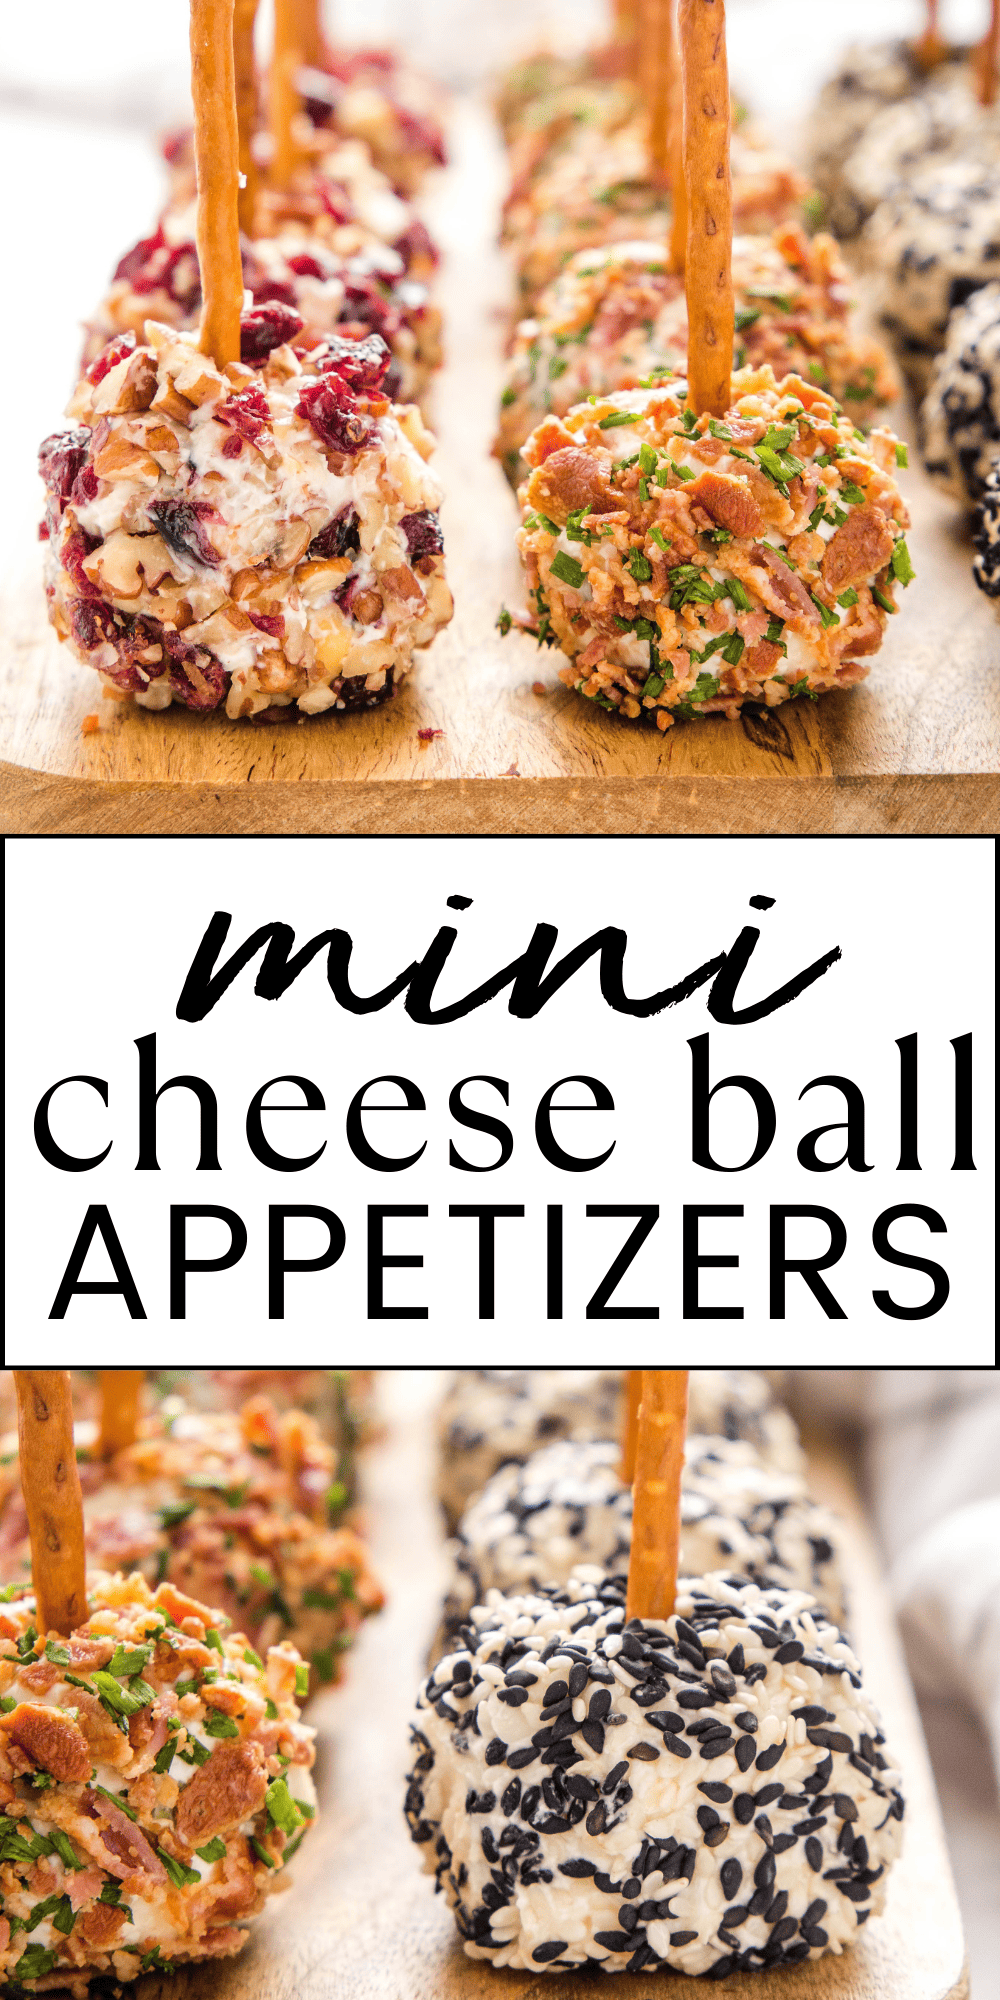 This Mini Cheese Ball Bites recipe is the perfect appetizer for cheese lovers! One basic cheese ball recipe made 3 ways: Cranberry & Pecan, Bacon & Ranch, and Honey Sesame. An easy make-ahead appetizer or snack recipe! Recipe from thebusybaker.ca! #cheeseball #cheeseballrecipe #appetizer #appetizerrecipe #holidayrecipe #holidaycheeseball #minicheeseballbites #minicheeseballs #cheeseappetizer #holidaypartyrecipe #snackrecipe via @busybakerblog